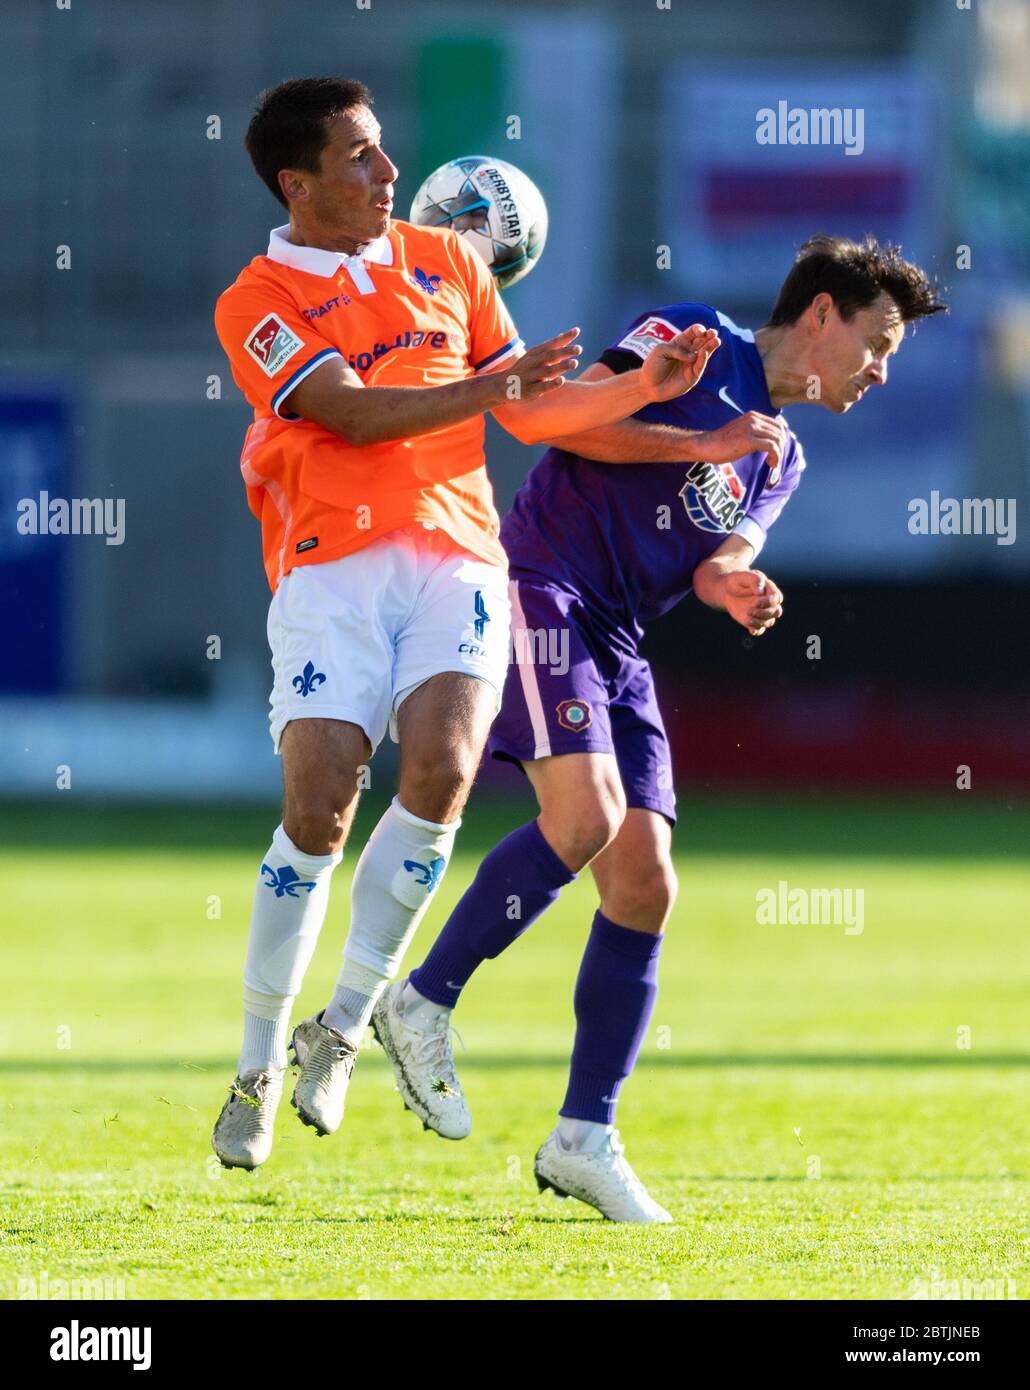 Aue, Germany. 26th May, 2020. Football: 2nd Bundesliga, FC Erzgebirge Aue - SV Darmstadt 98, 28th matchday, at the Sparkassen-Erzgebirgsstadion. Aues Clemens Fandrich (r) against Fabian Schnellhardt of Darmstadt. Credit: Robert Michael/dpa - Pool /dpa - IMPORTANT NOTE: In accordance with the regulations of the DFL Deutsche Fußball Liga and the DFB Deutscher Fußball-Bund, it is prohibited to exploit or have exploited in the stadium and/or from the game taken photographs in the form of sequence images and/or video-like photo series./dpa/Alamy Live News Stock Photo